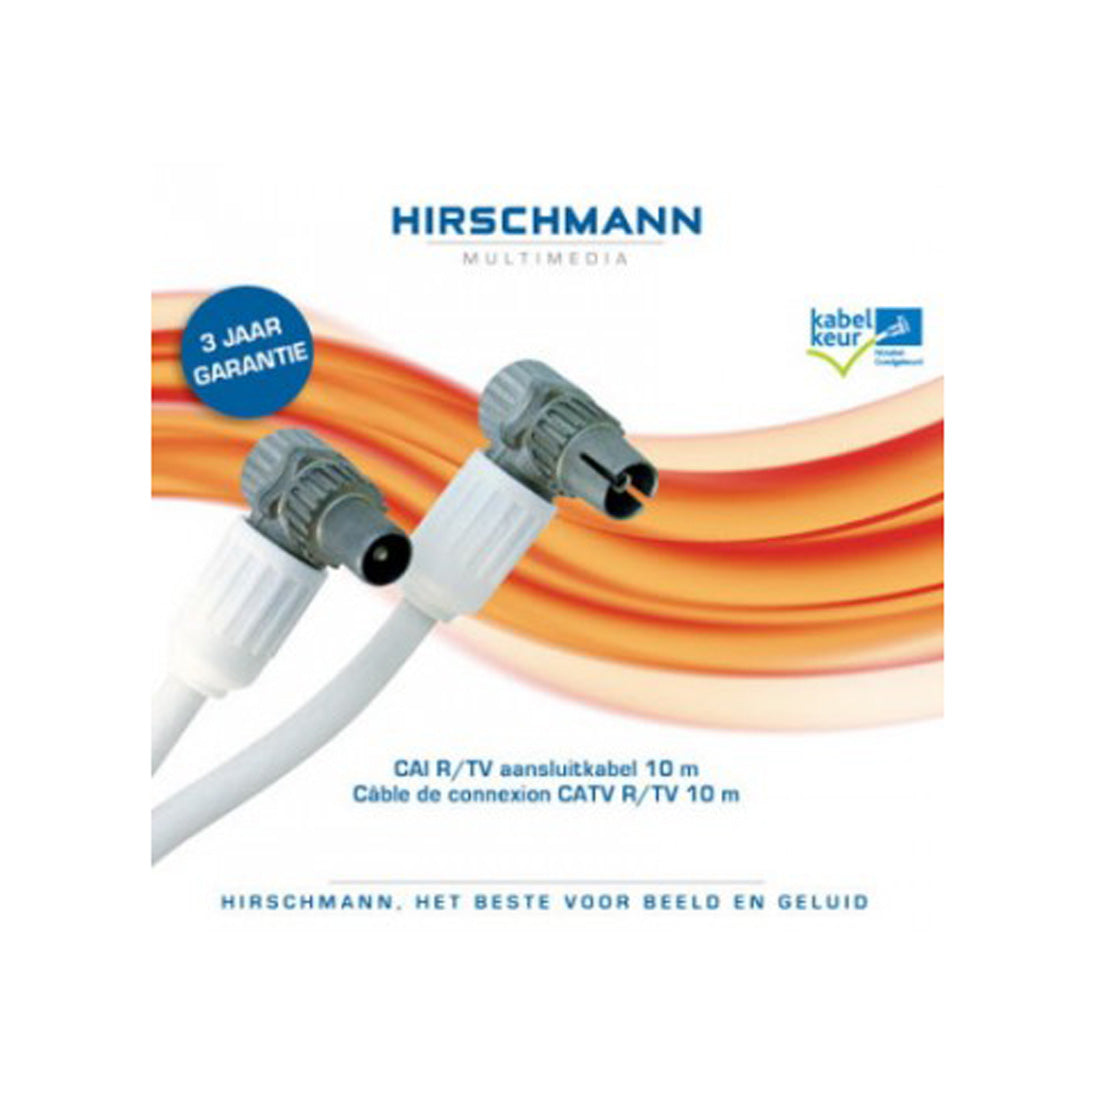 Hirschmann Electronics Coaxial connection cable with CATV R/TV connectors, 10 m